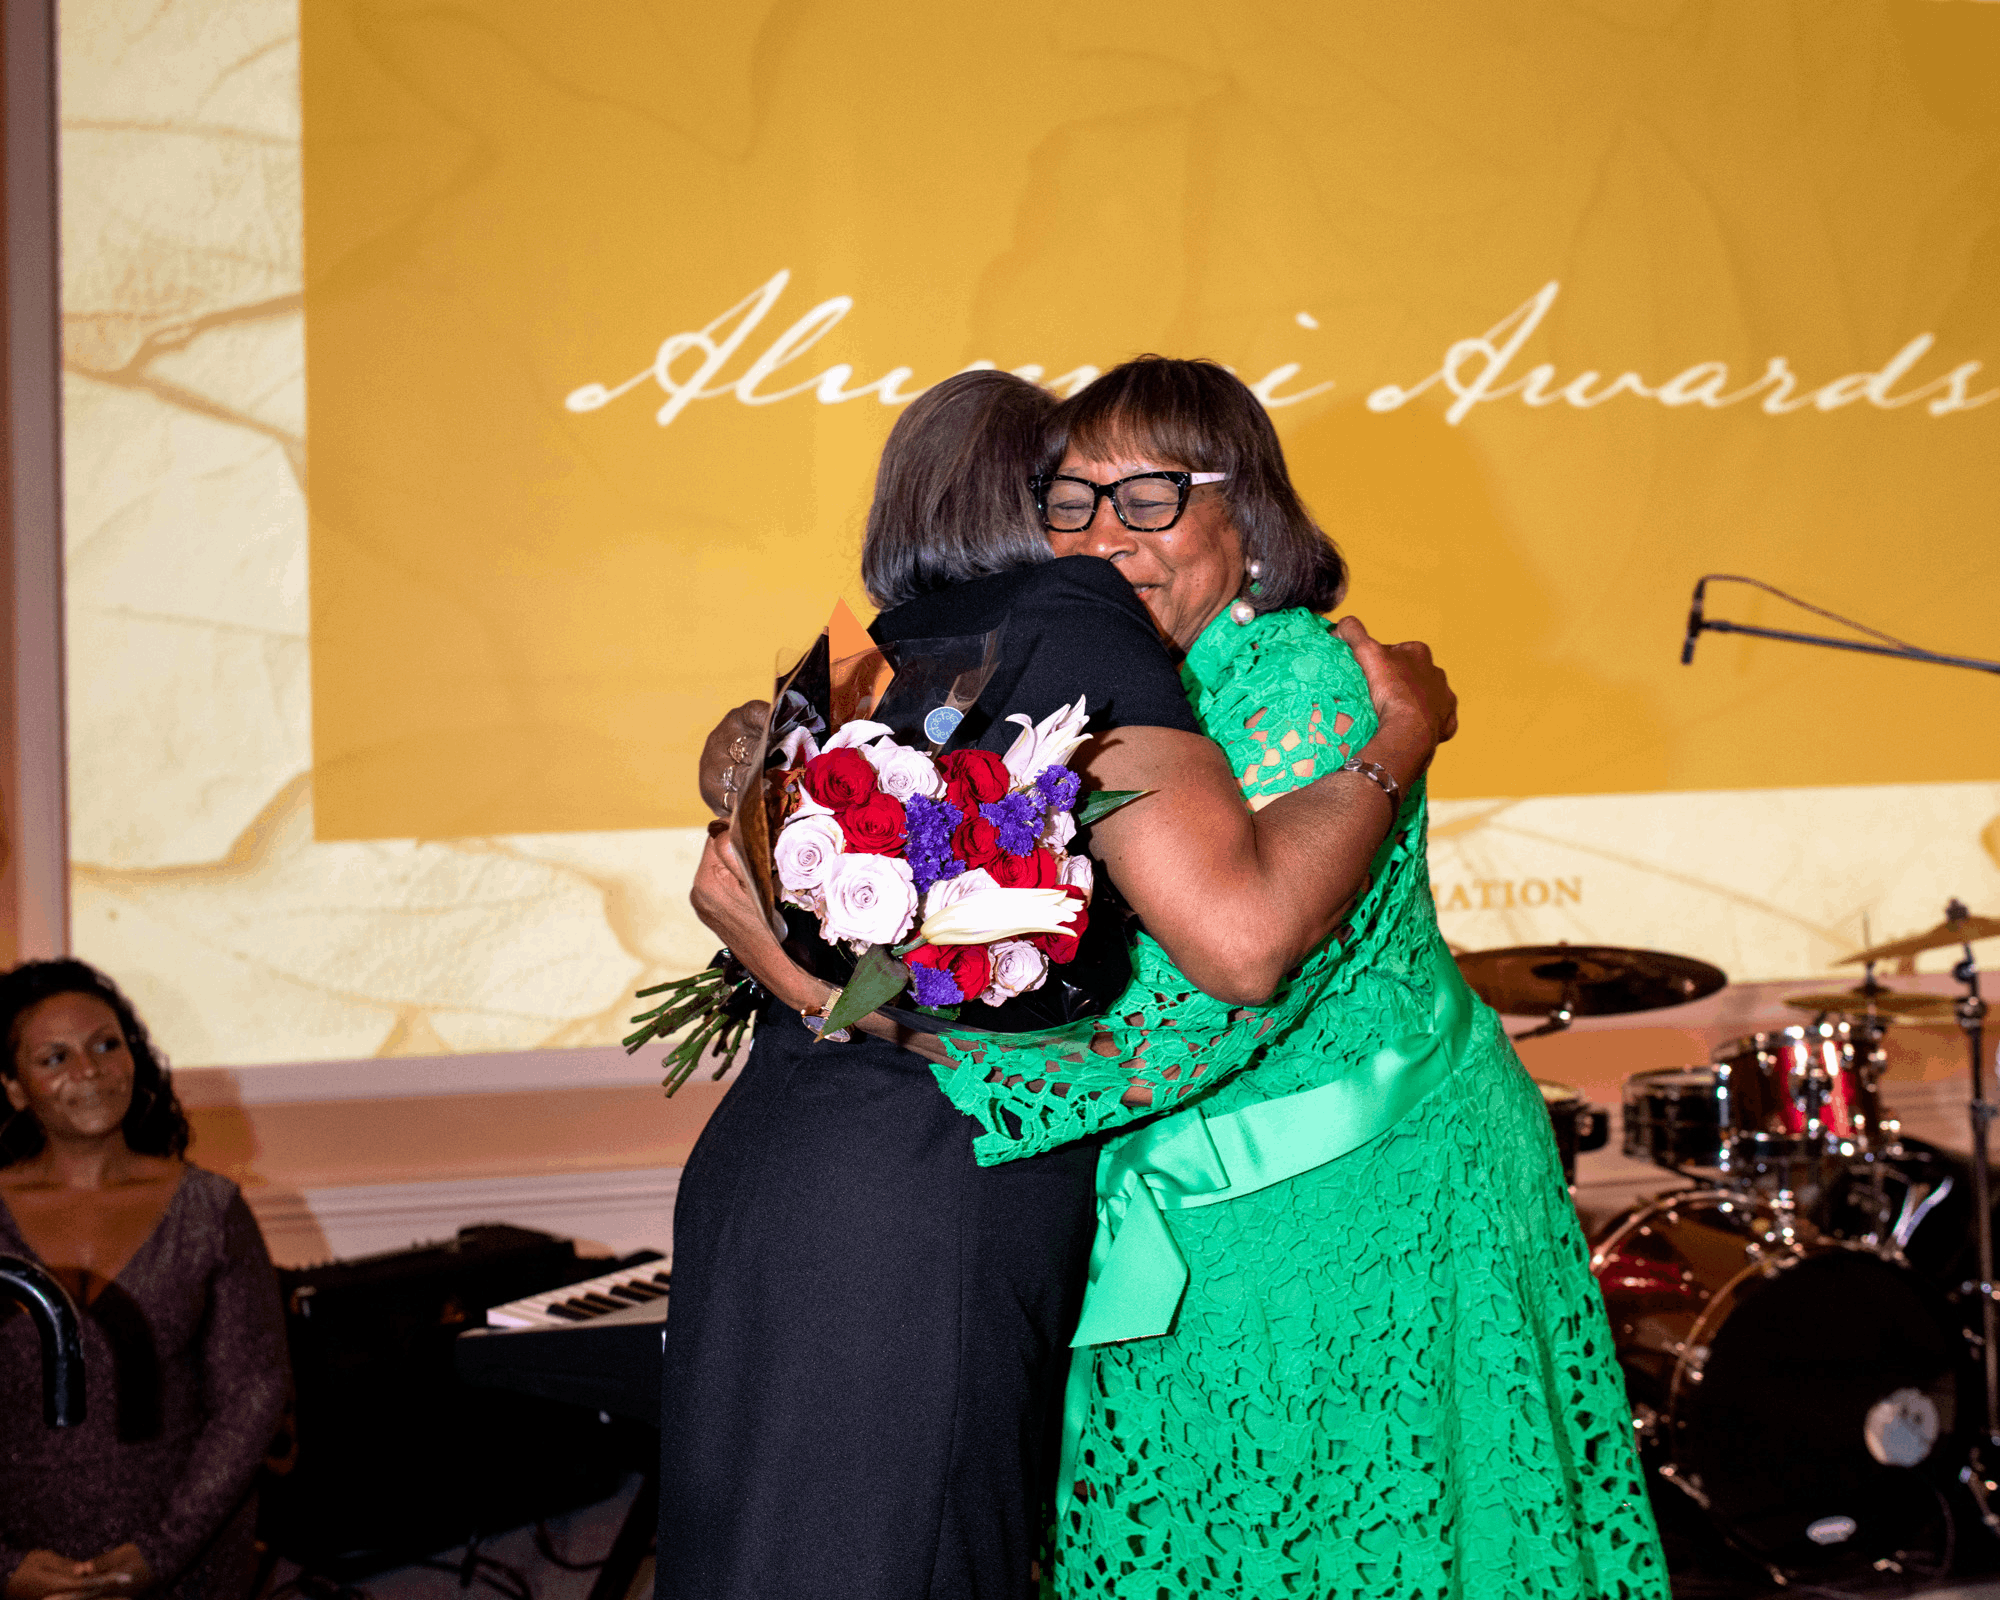 Dr. Patricia A. Ackerman, BA ’66, [RIGHT] embraces fellow Bobcat and friend Connie Lawson-Davis, BSED ’67. Dr. Ackerman was honored and celebrated as this year’s Alumna of the Year – the highest honored bestowed to an OHIO graduate – at Homecoming’s Alumni Awards Ceremony.